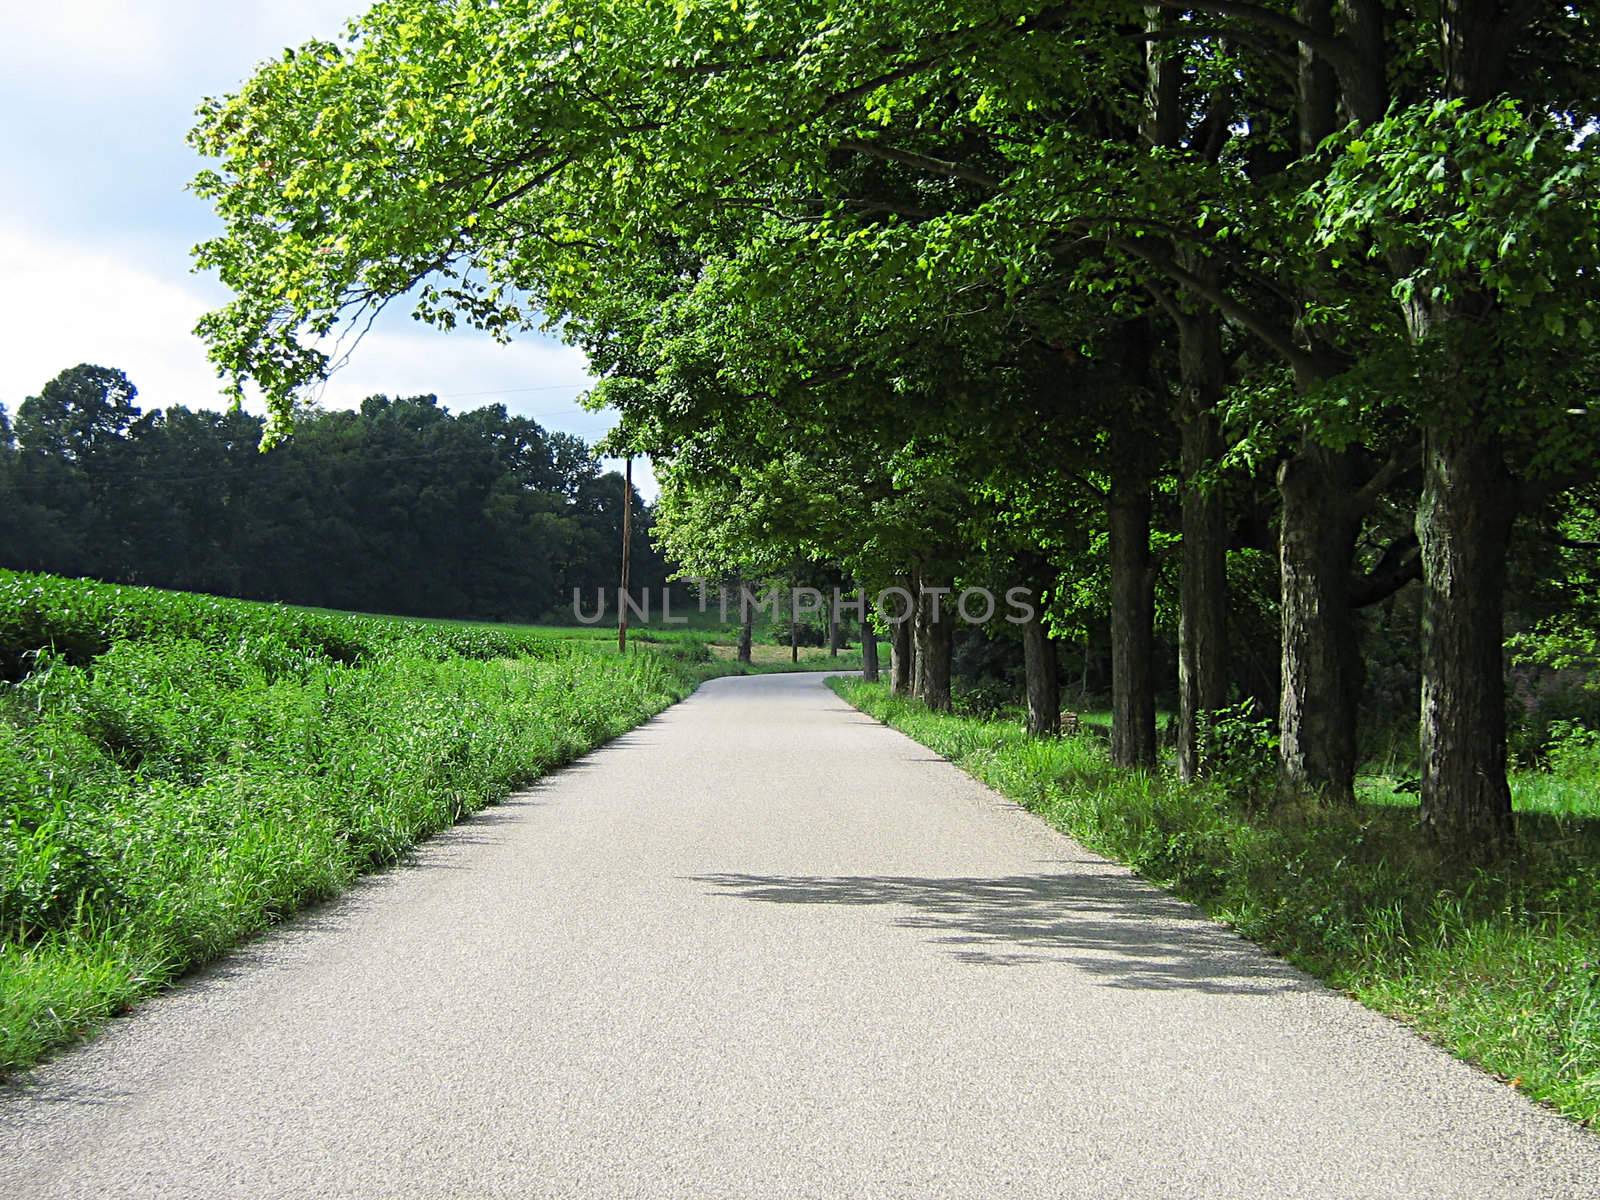 A photograph of a quiet country road.